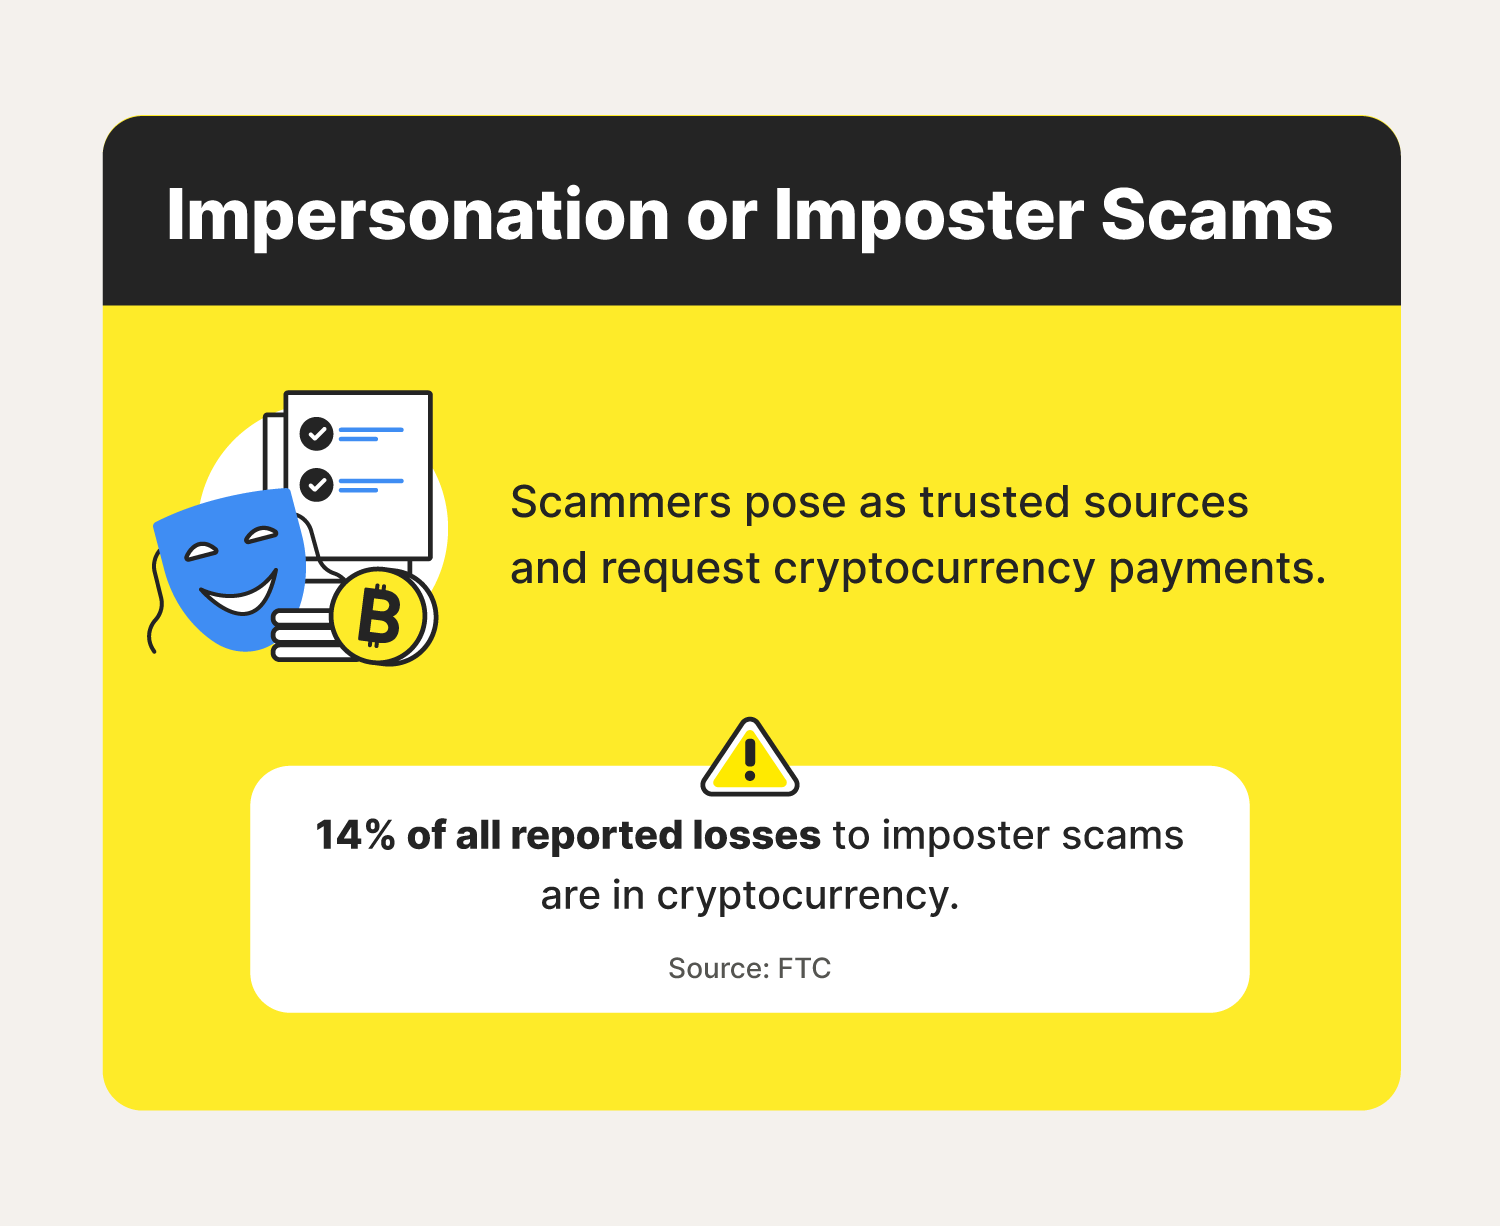 An illustration accompanies a description of impersonation cryptocurrency scams. 